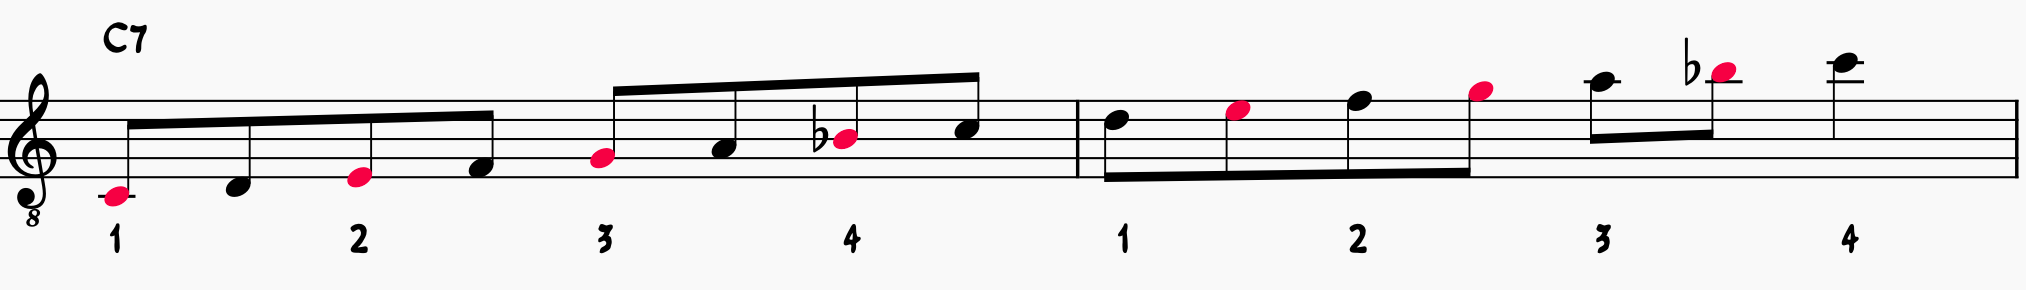 Chord Tones of a C7 chord shown over two measures with Mixolydian Scale